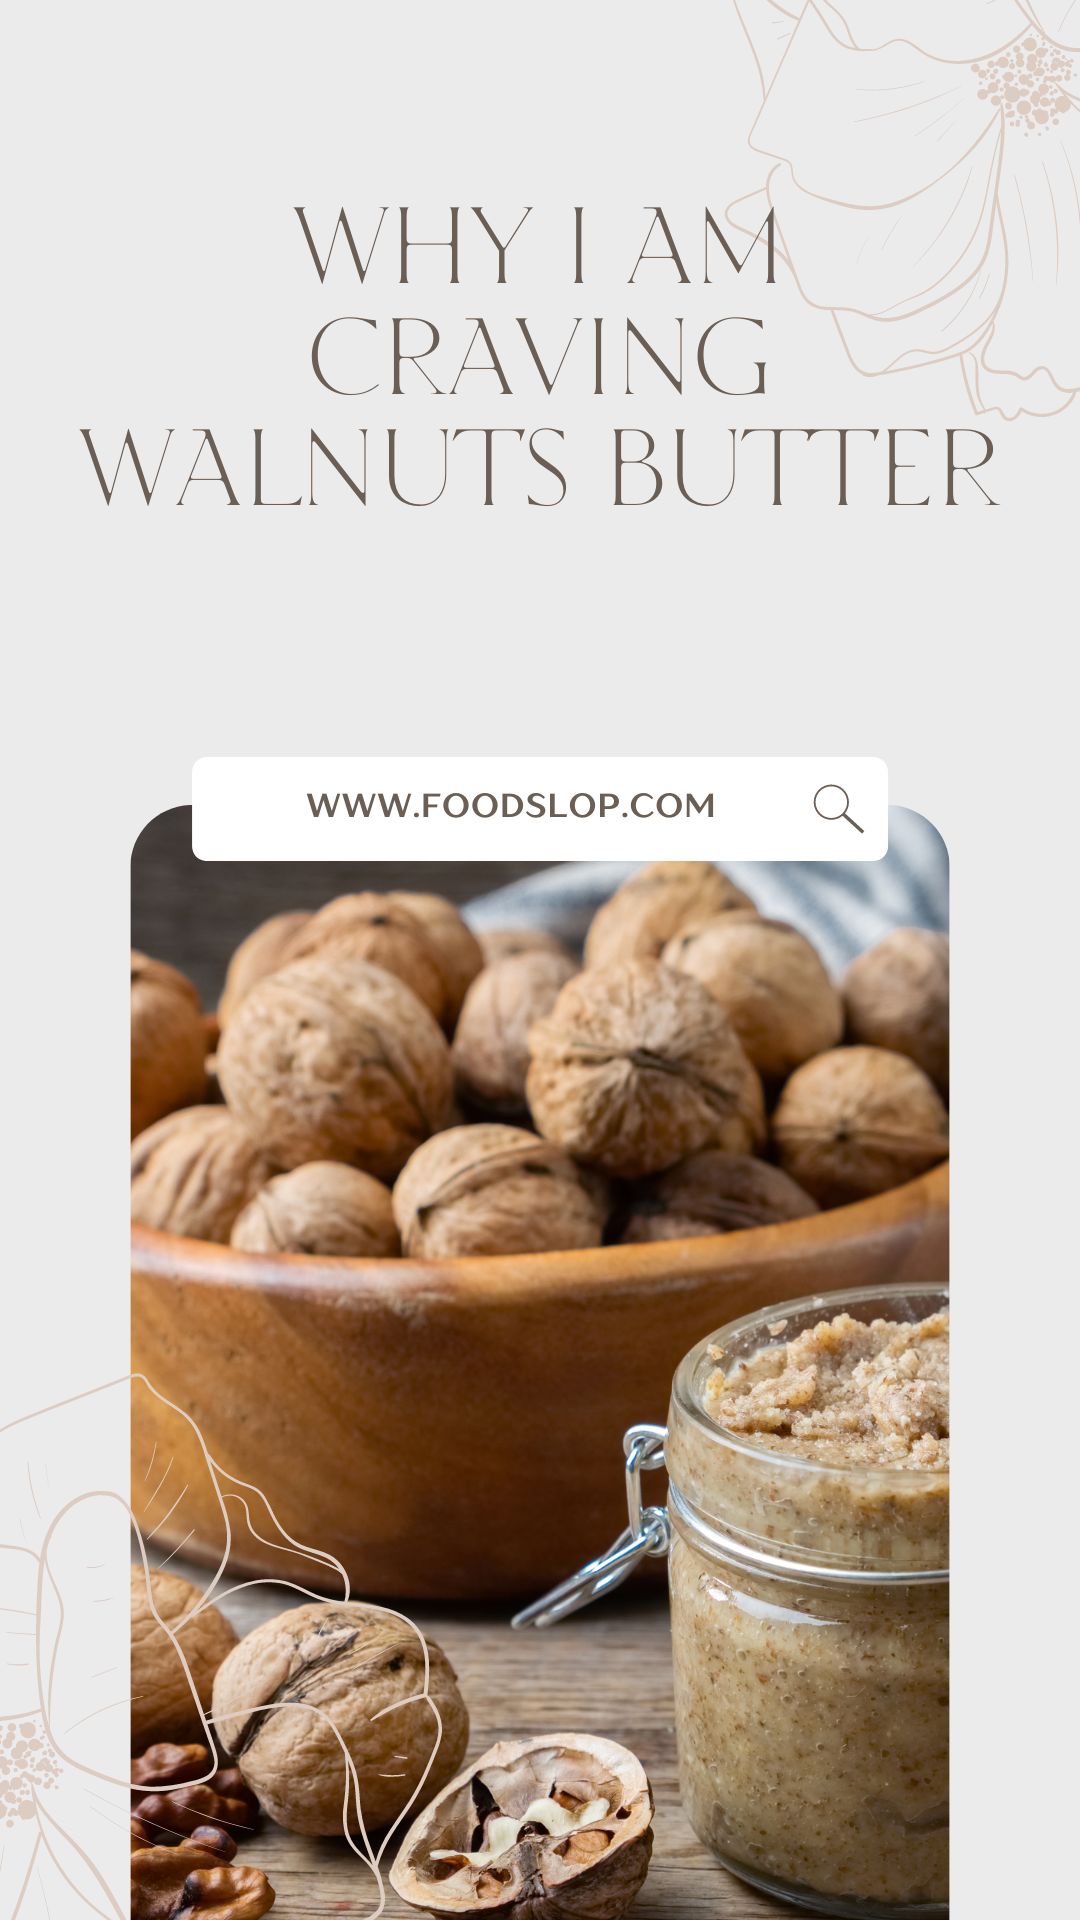 Why I Am Craving Walnuts Butter